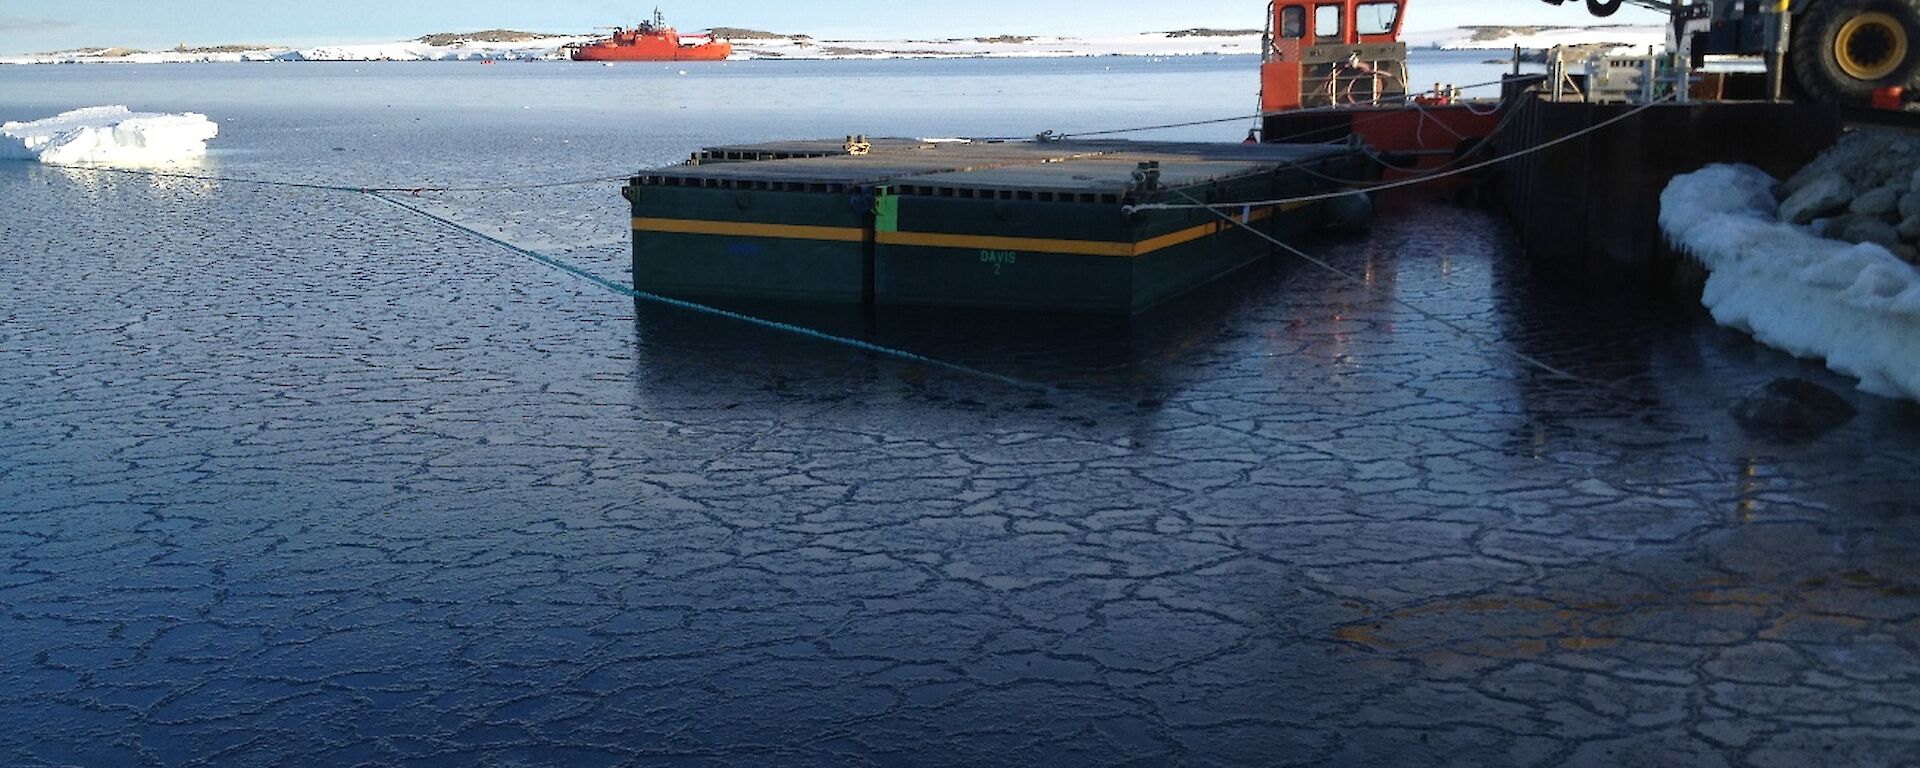 Photo shows a small floating pier awaiting resupply ship Aurora Australis, crane in right of photo